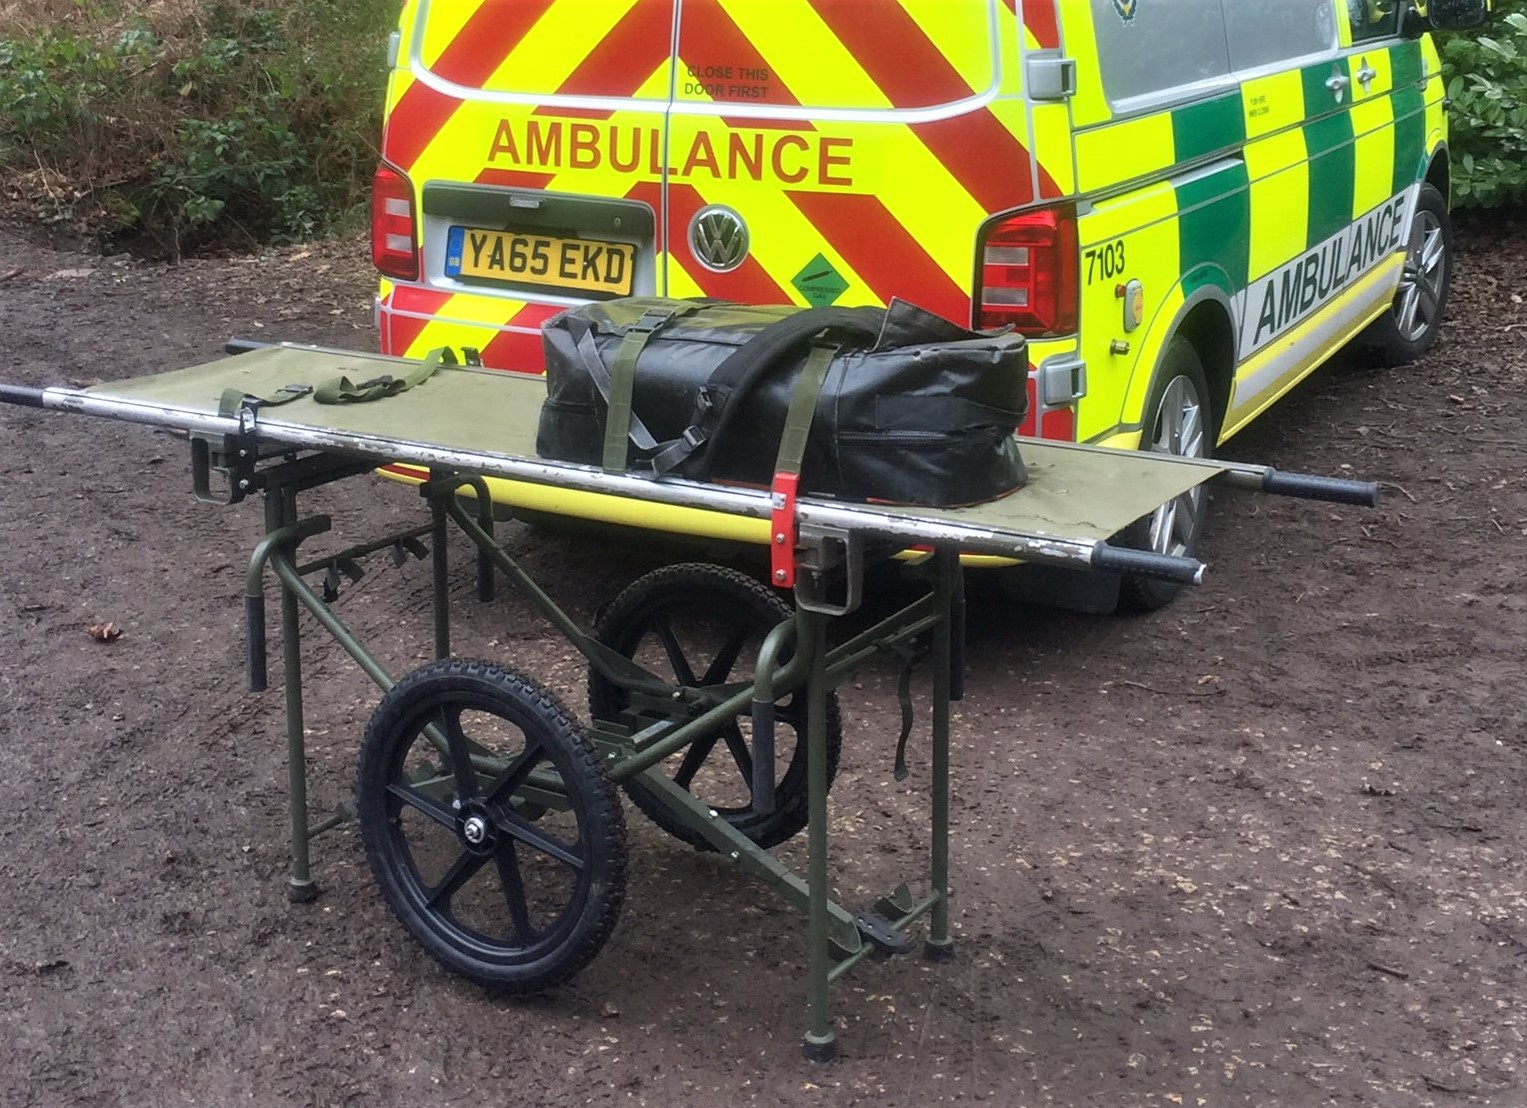 Stretchers in The UK: Which Are The Most Used?